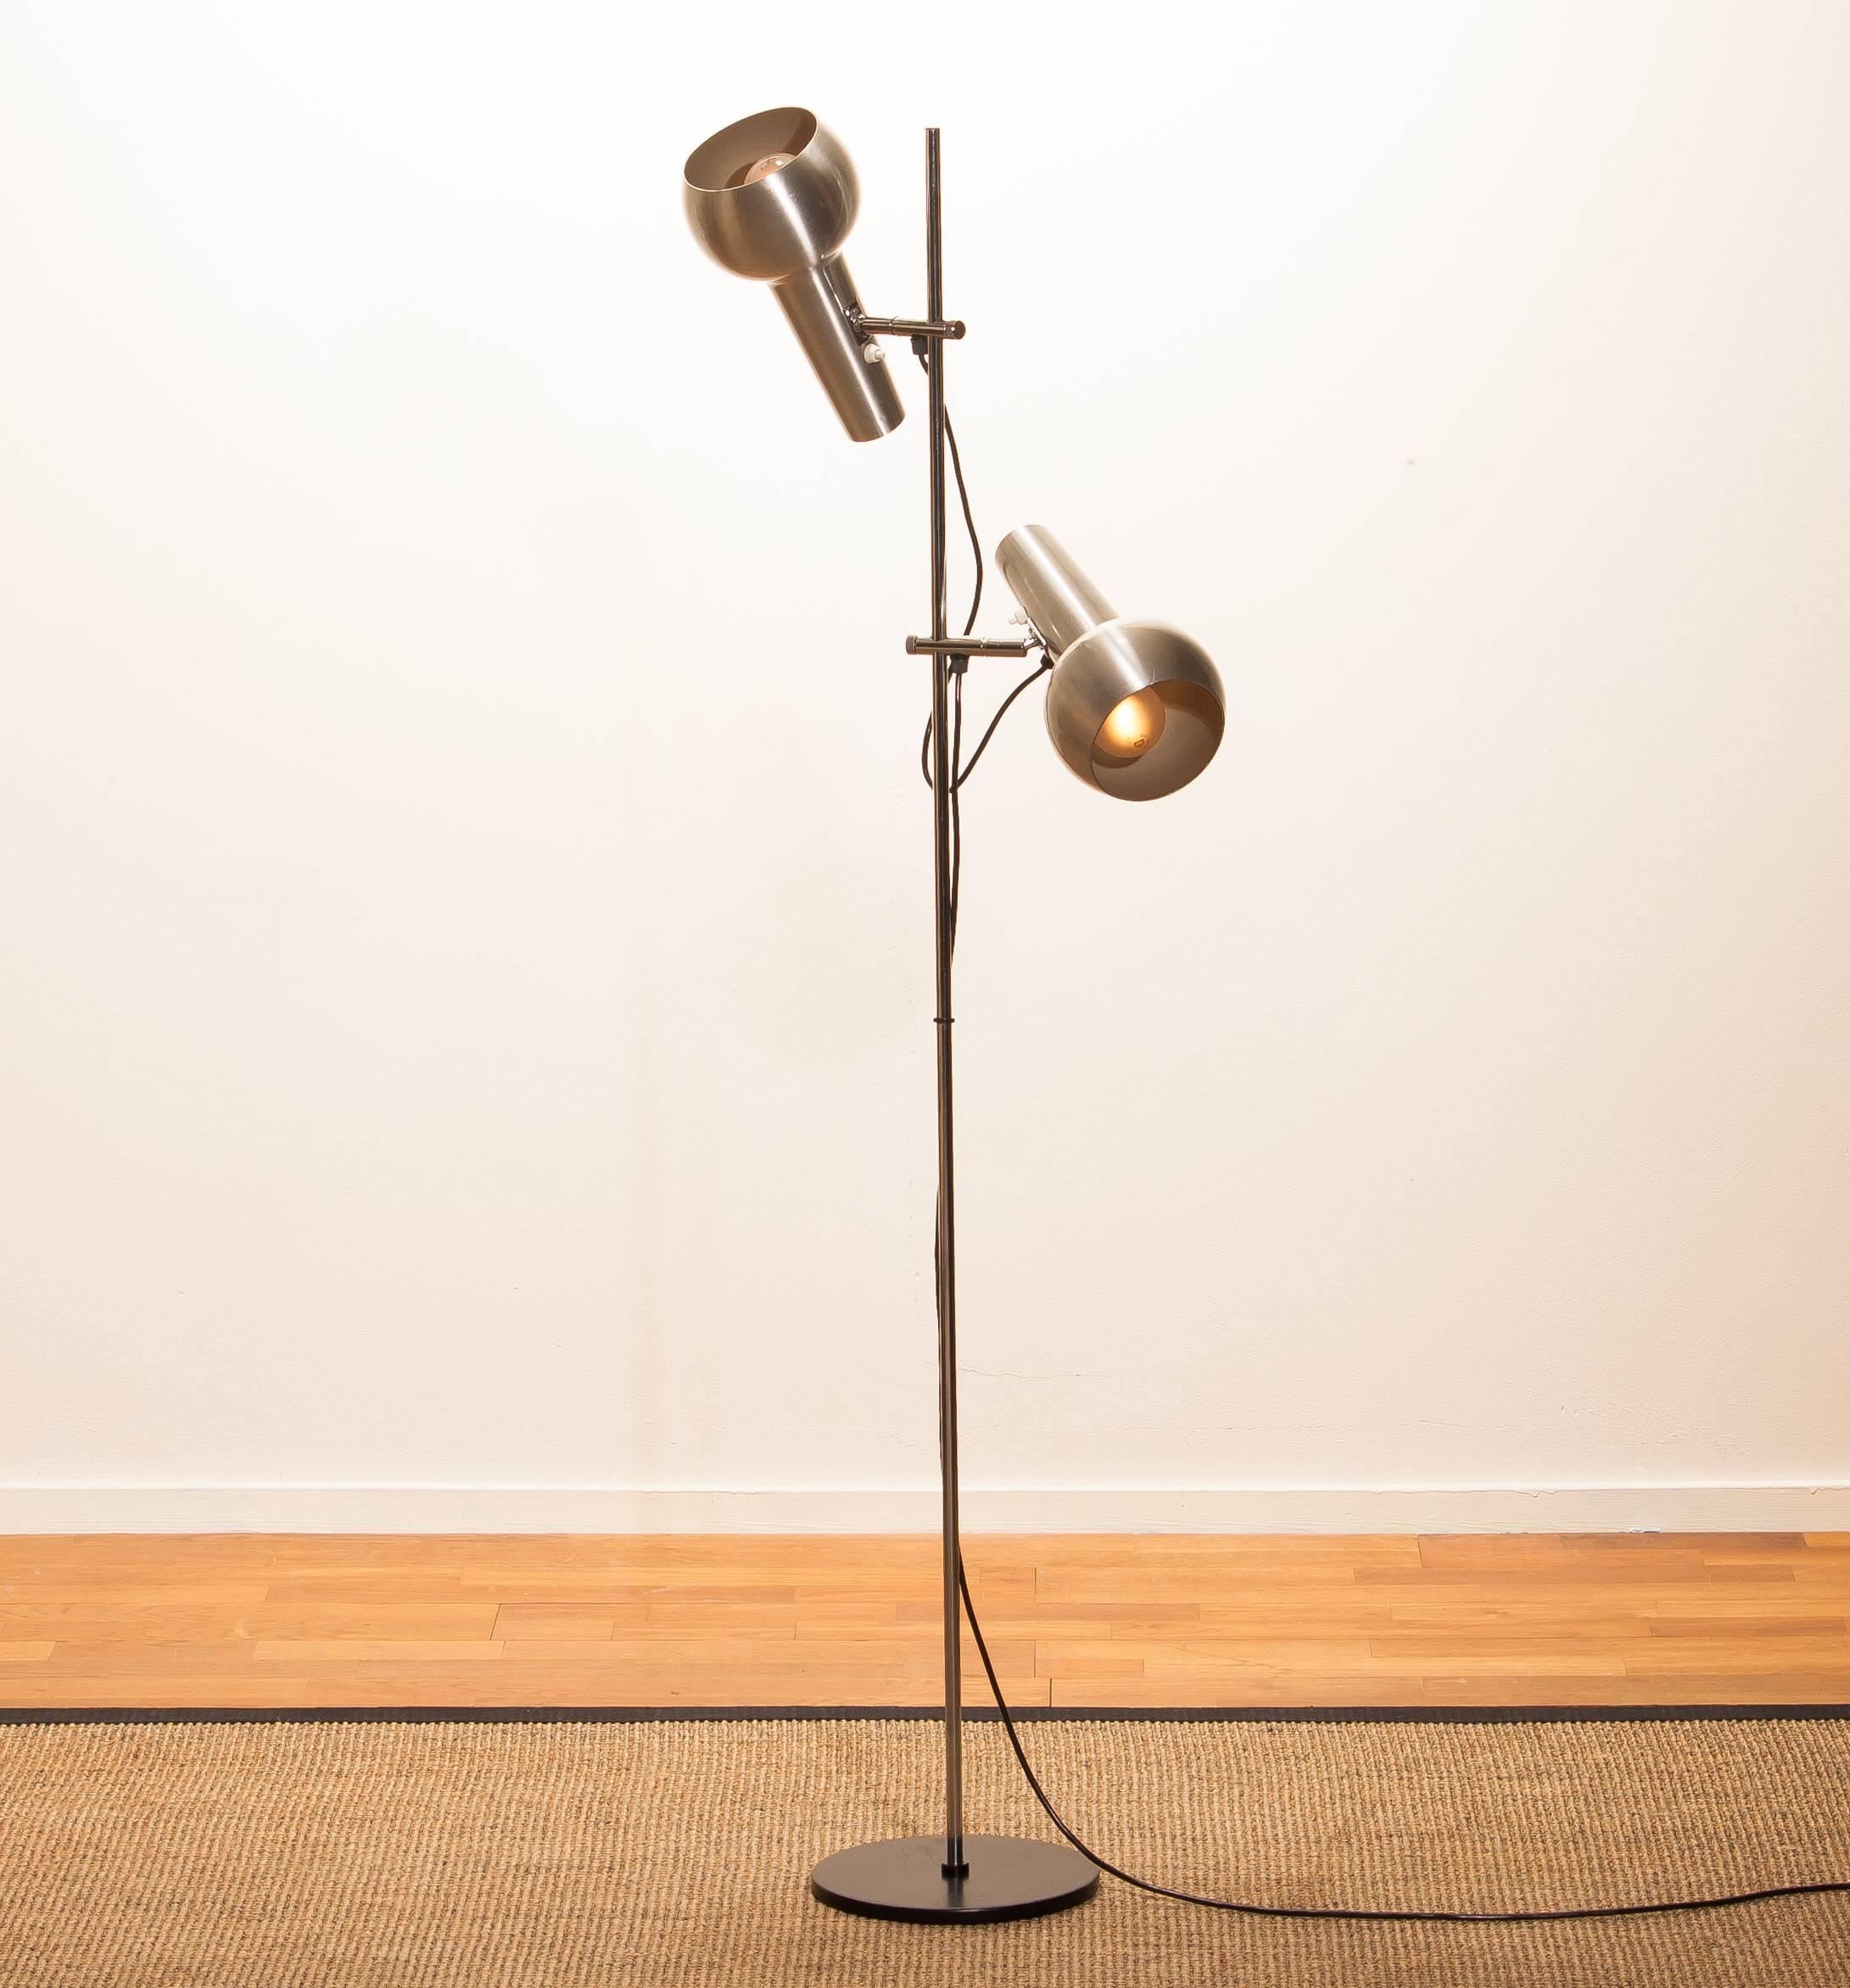 Late 20th Century Chrome and Aluminium Double Shade Floor Lamp by Koch & Lowy from the 1970s, US